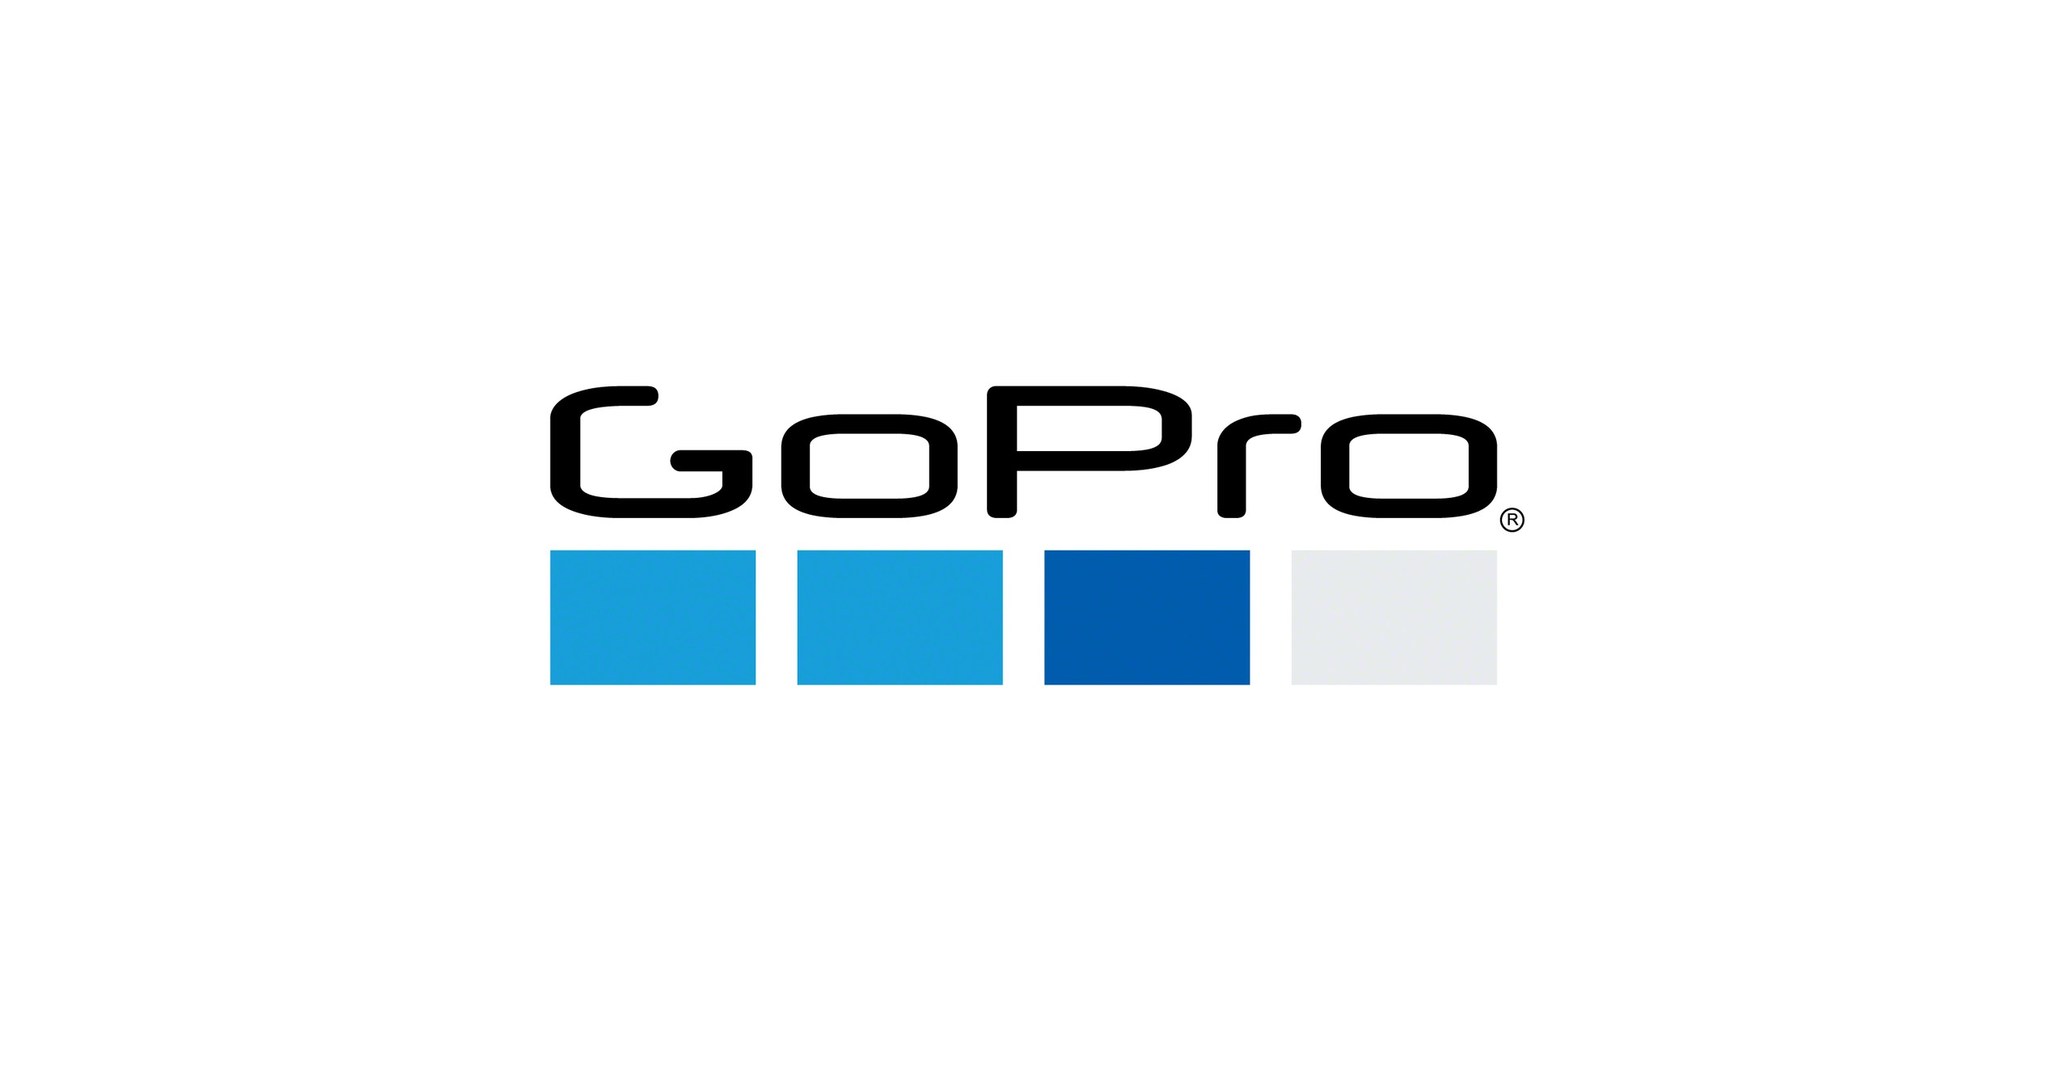 GoPro Announces Global Restructuring, Provides Preliminary Q1 Results and  Withdraws 2020 Guidance Due to COVID-19 Impact